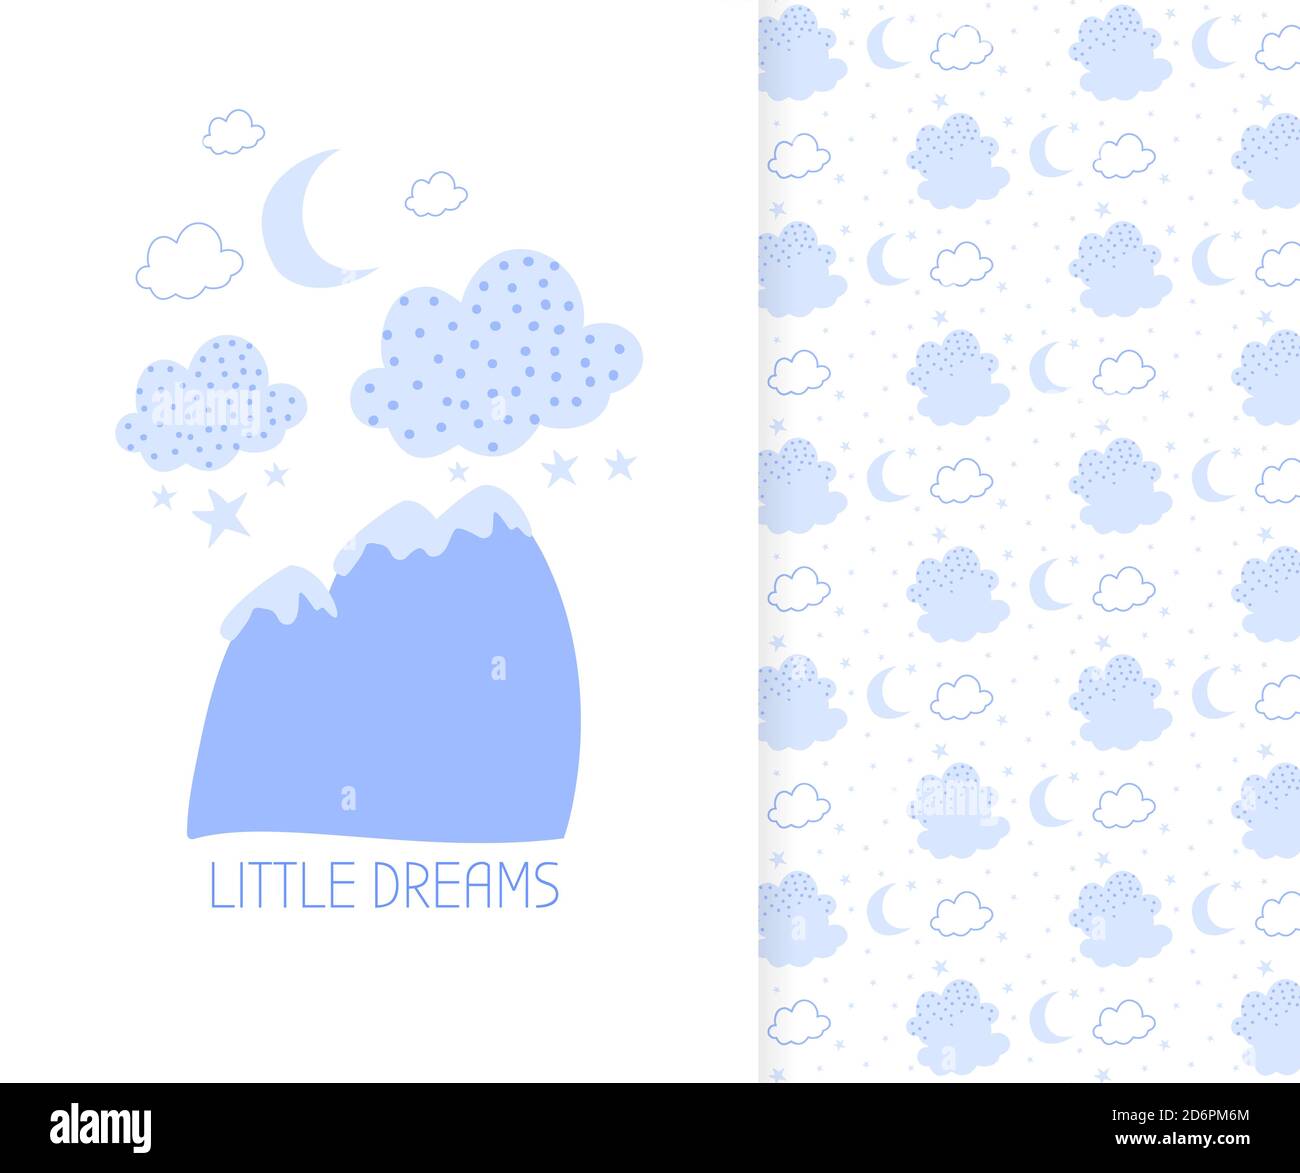 Kids banner. Cute blue doodle cloud seamless pattern. Pastel tileable background of hand drawn clouds with circle spot, moon. Great for fabric, paper print, wallpaper decor or book Vector illustration Stock Vector